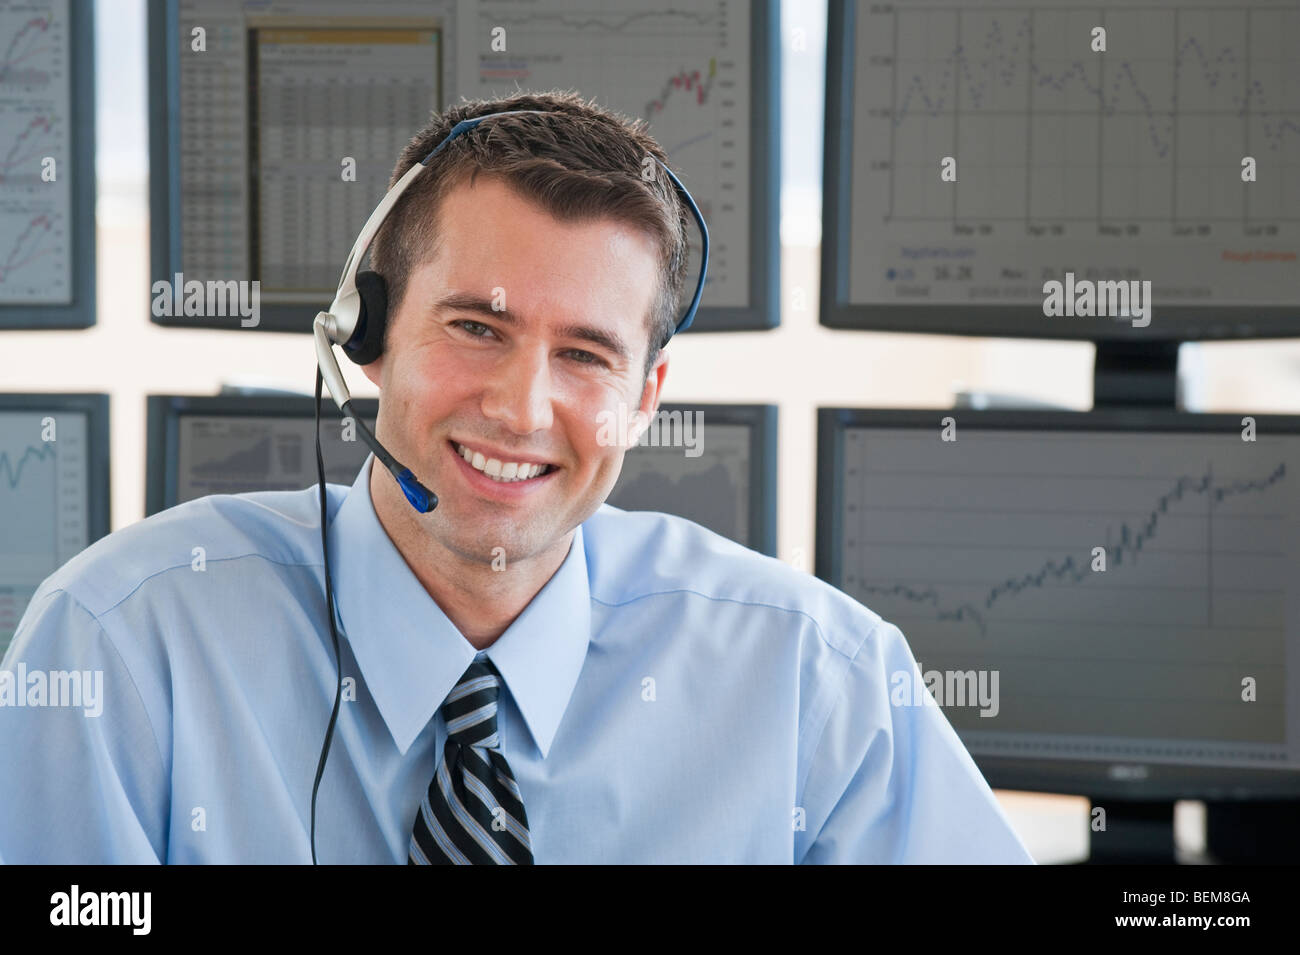 Male trader with headset Stock Photo